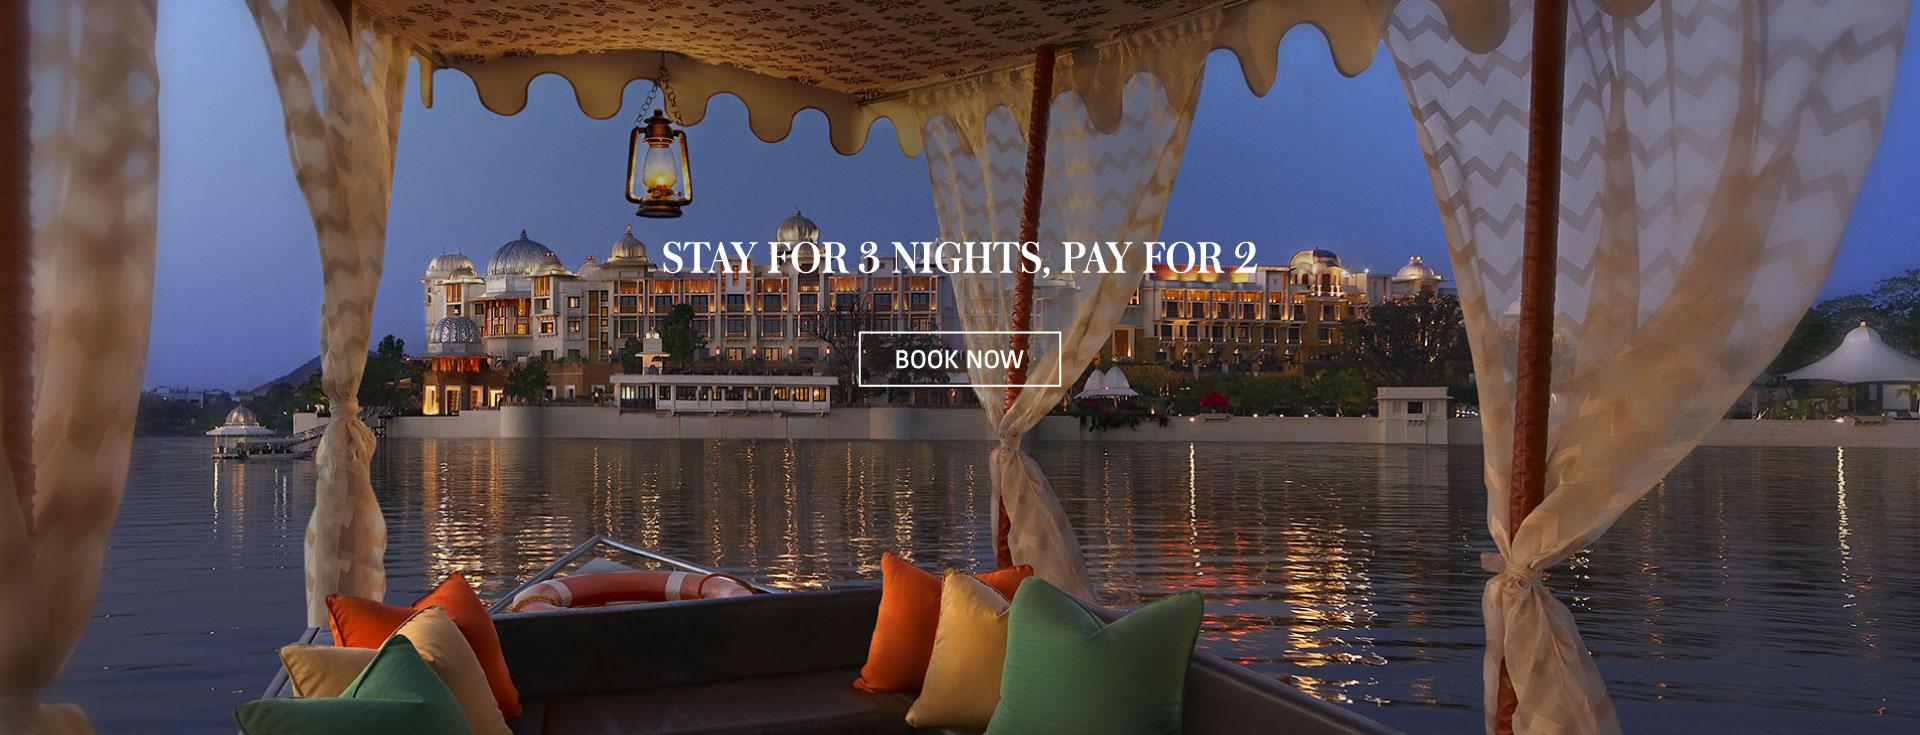 Pay for 2 Nights Stay for 3 Nights Offer